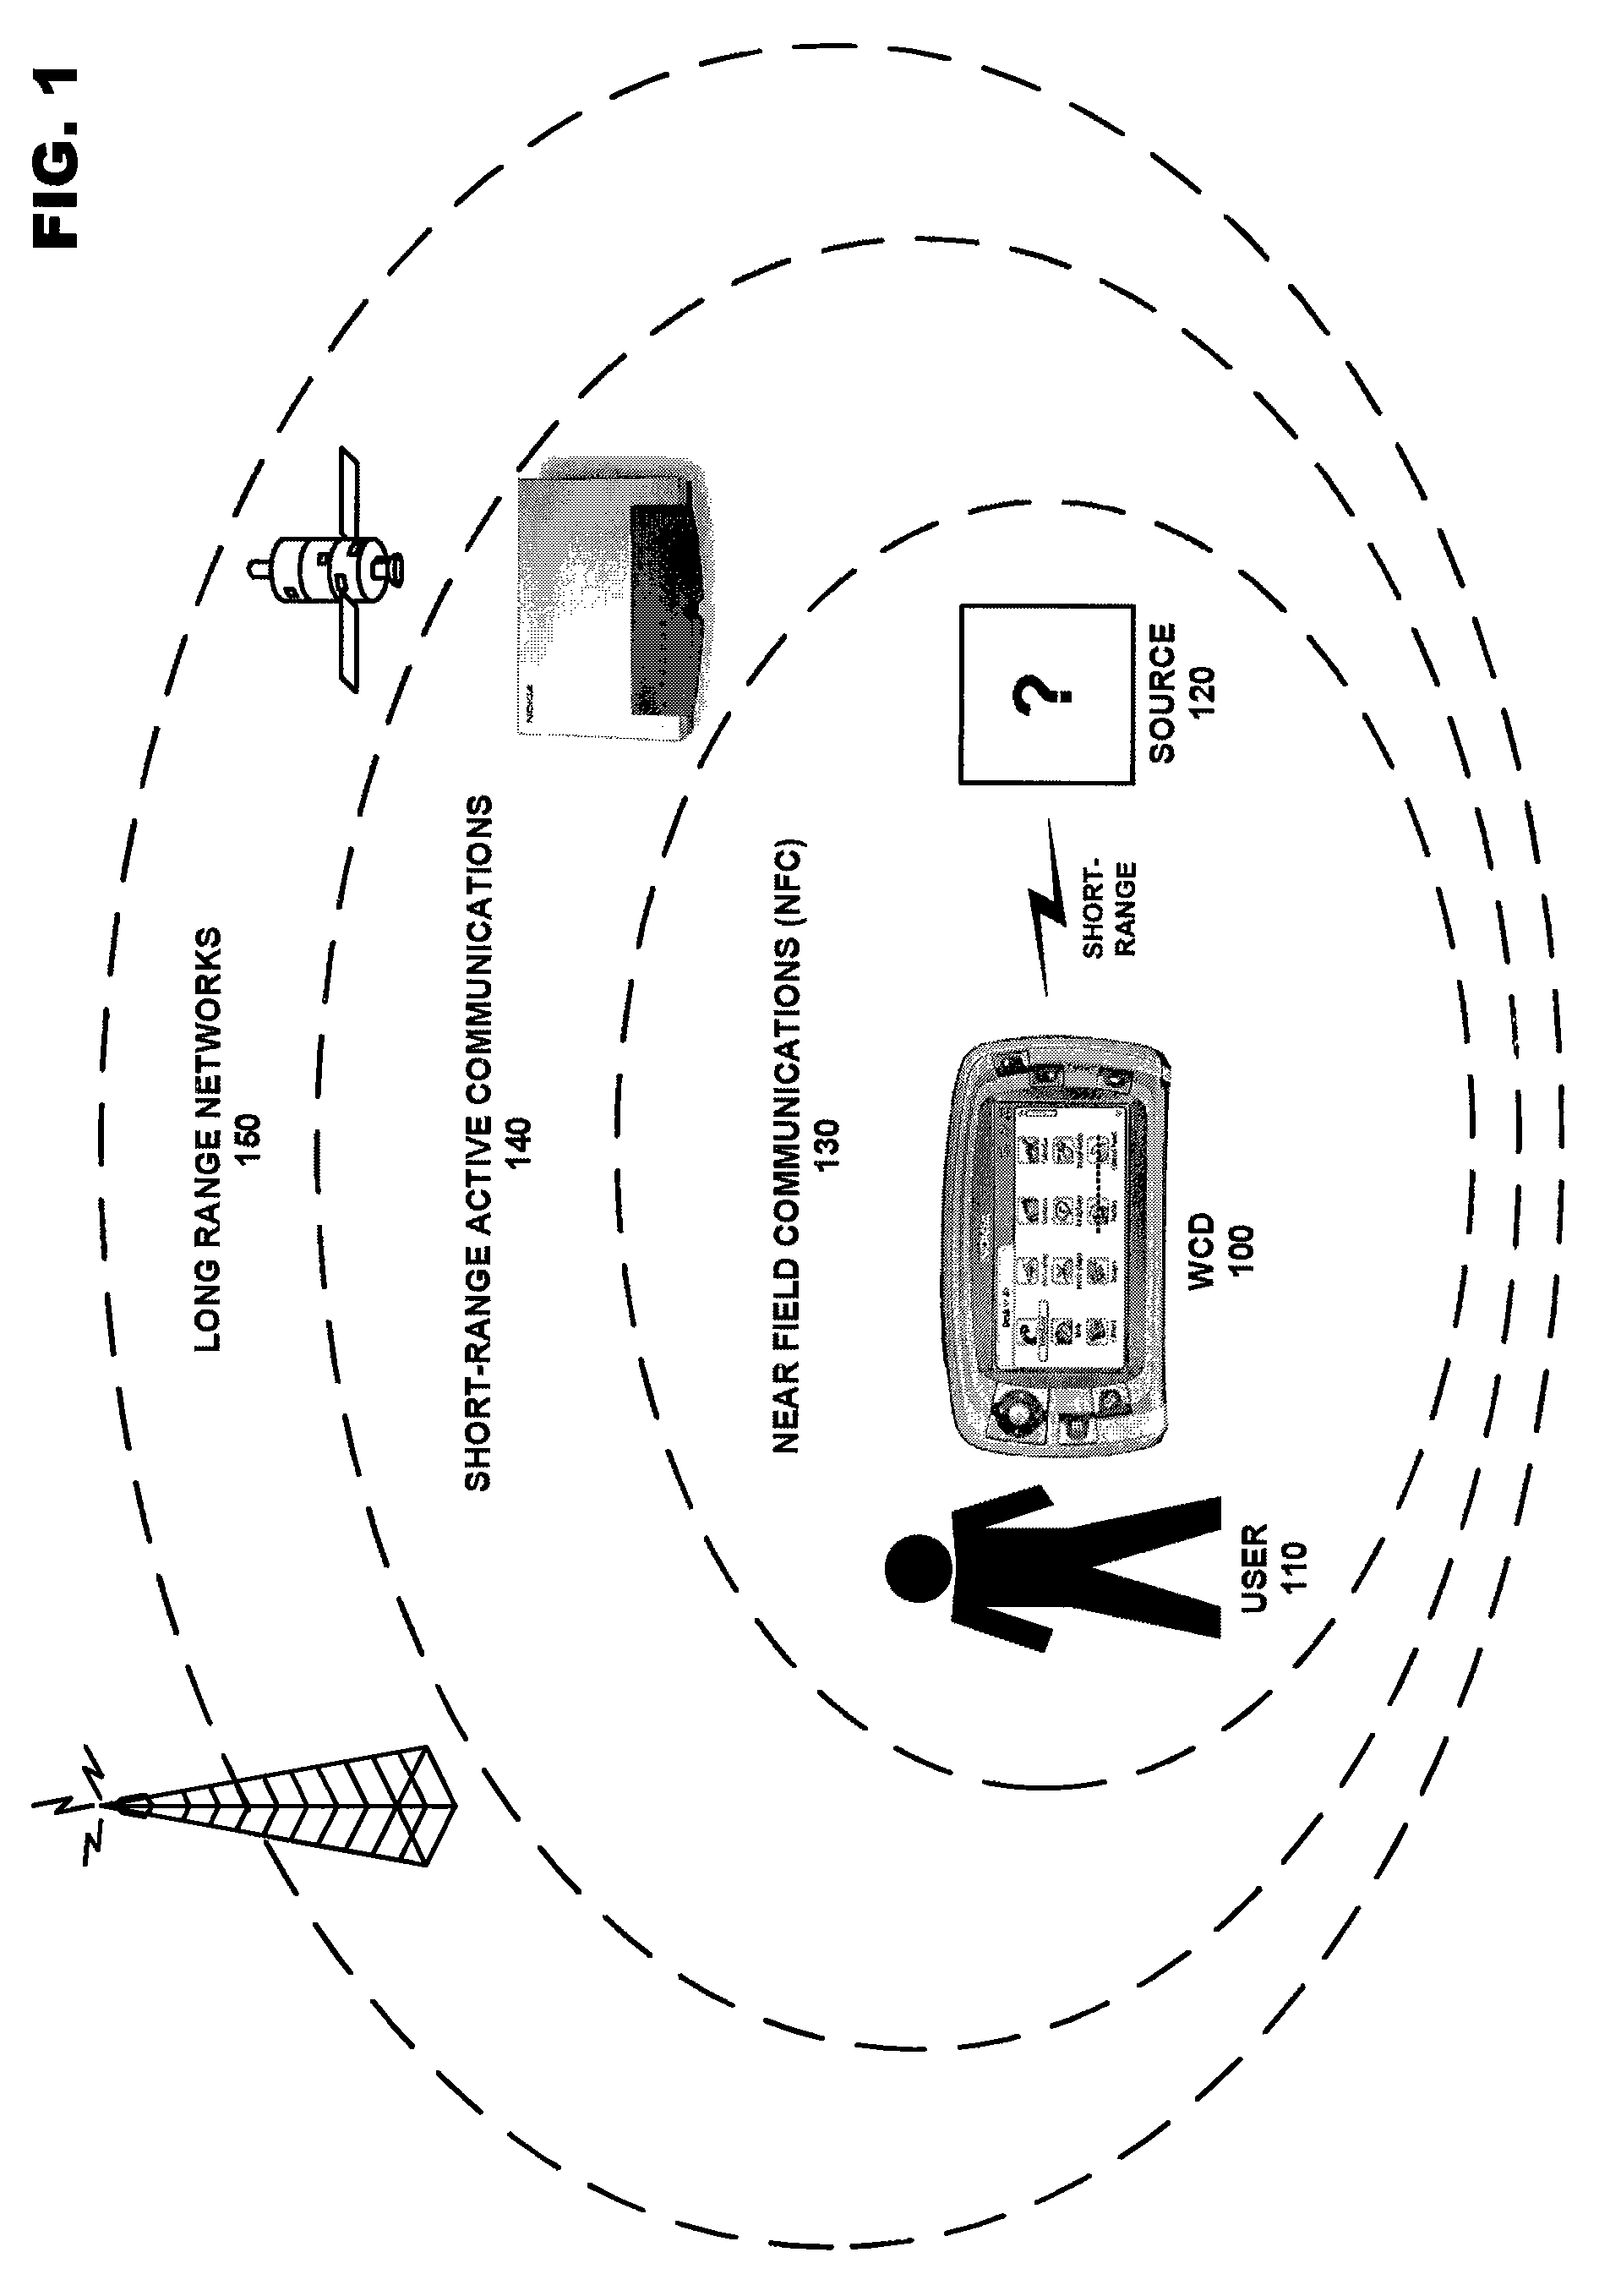 Managing unscheduled wireless communication in a multiradio device